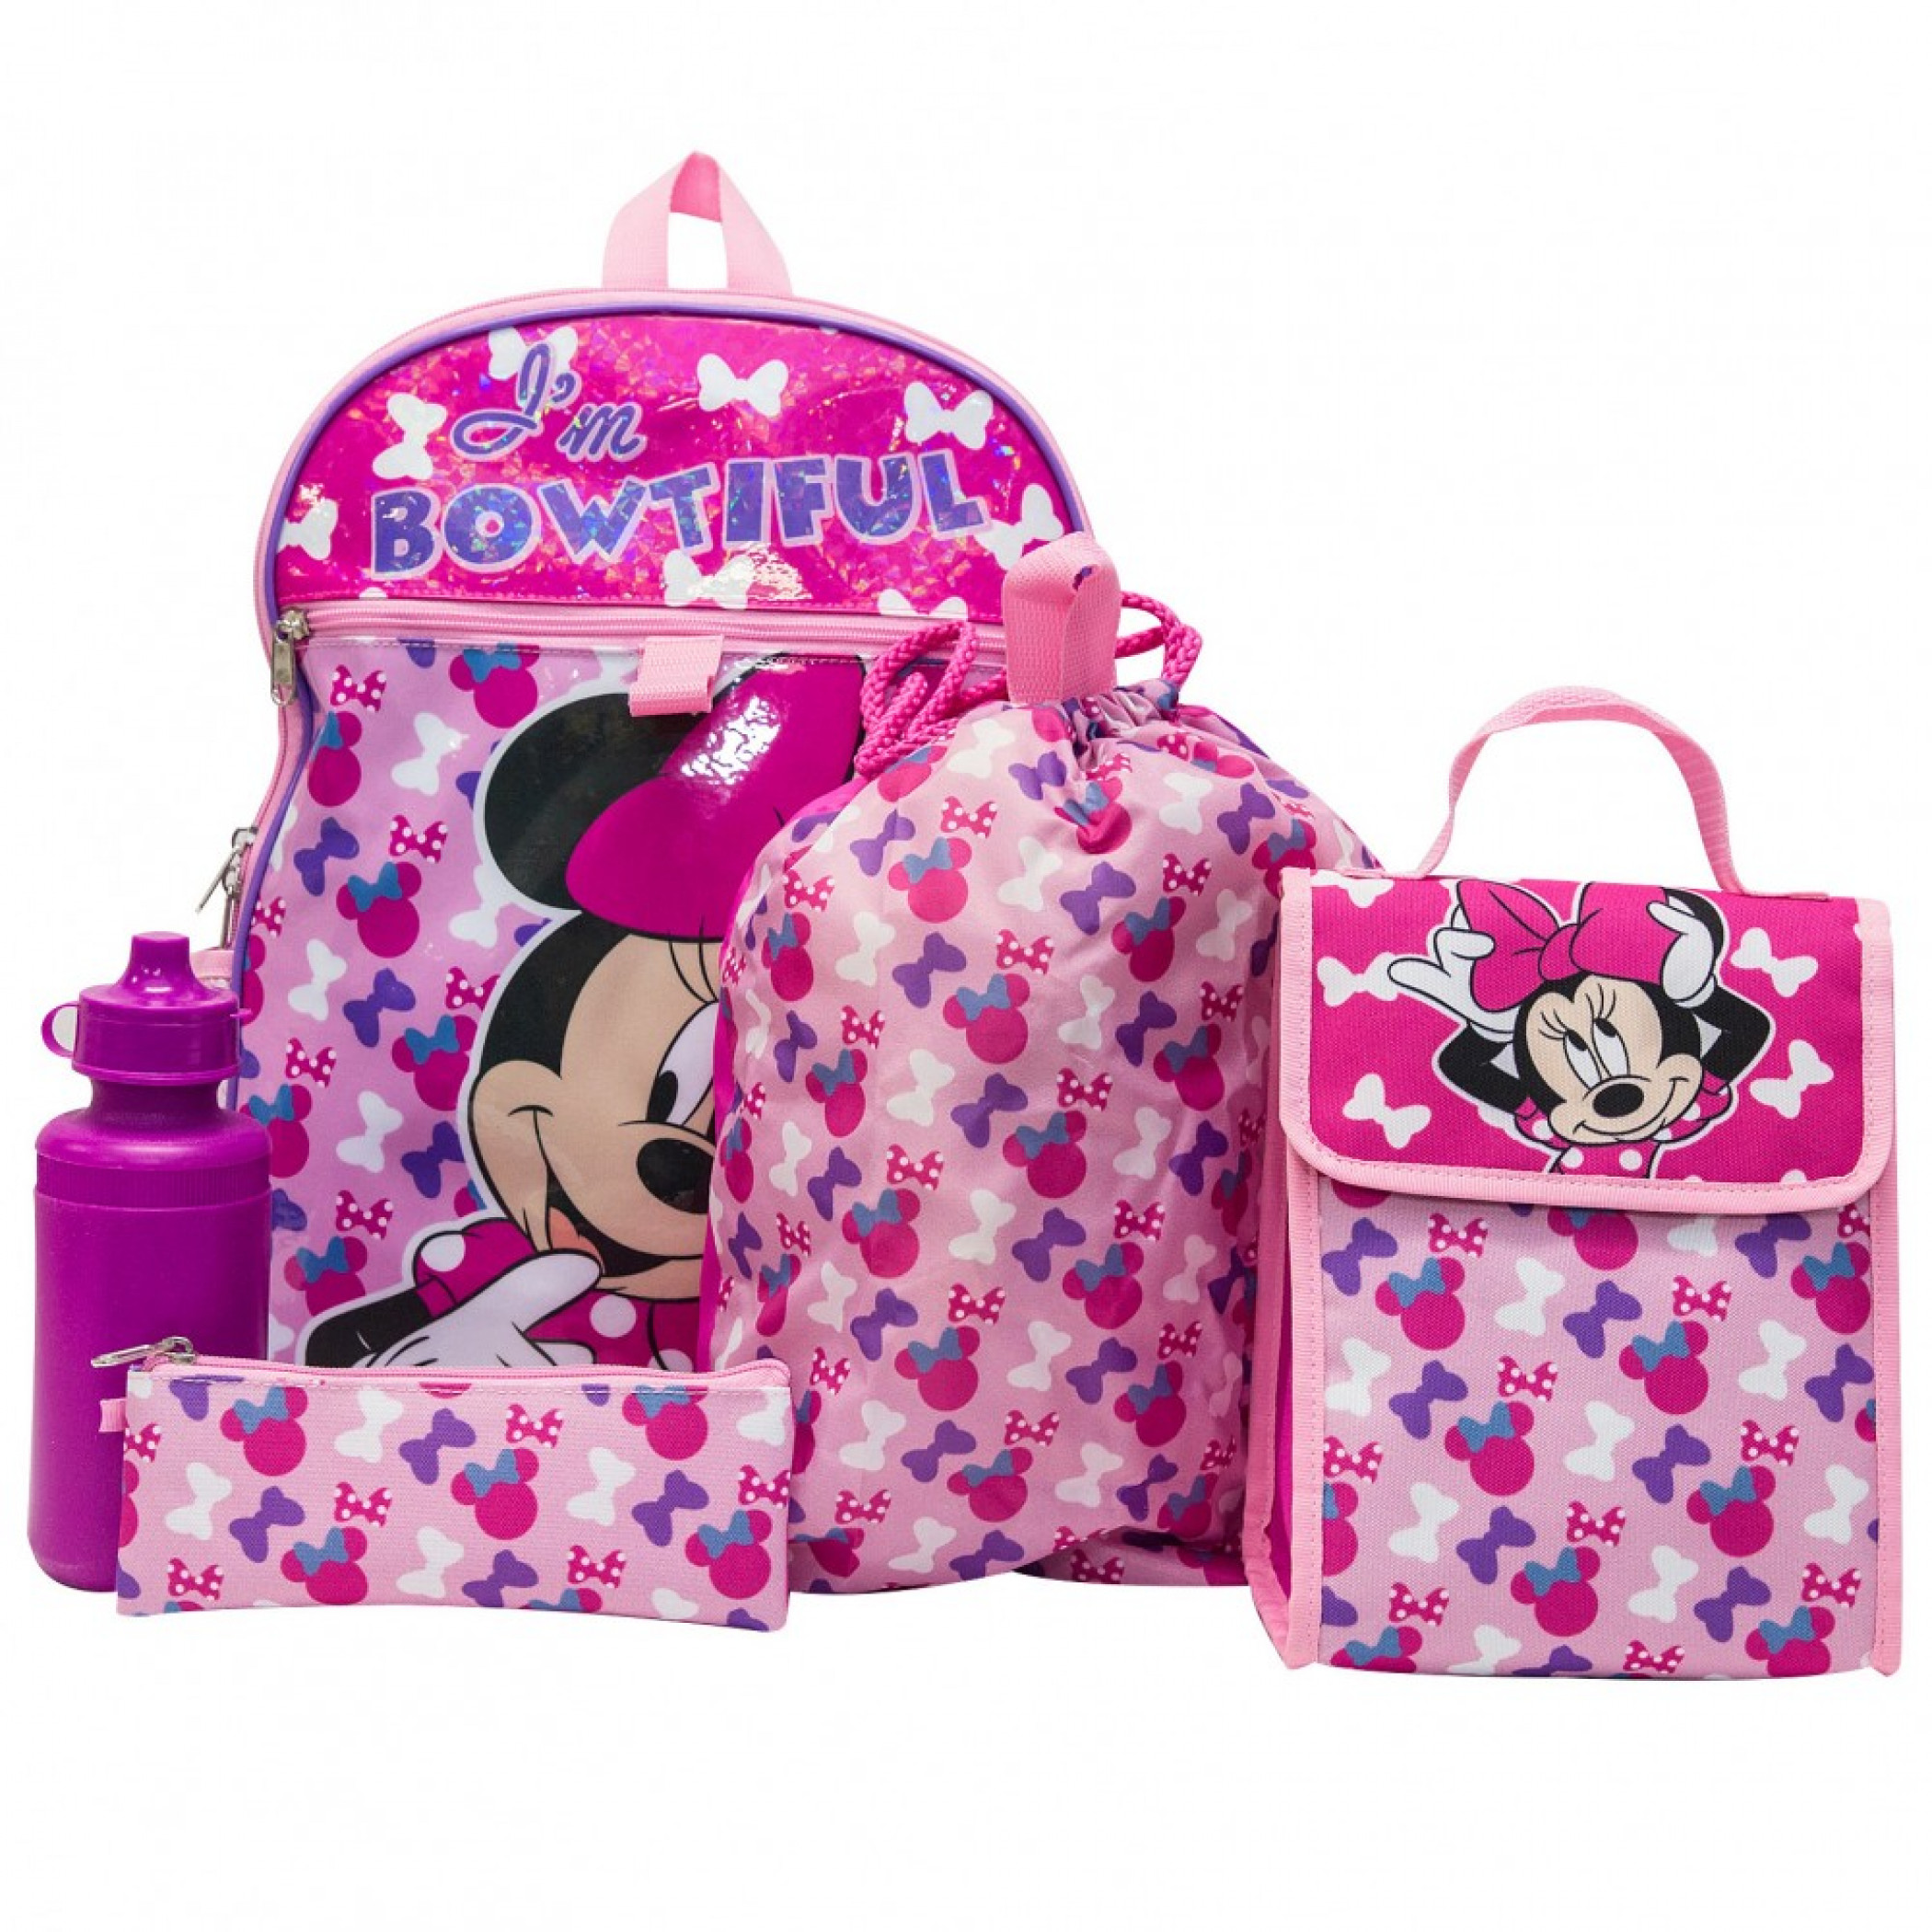 Accessory Innovations 5 Piece Kids Licensed Backpack Set Minnie